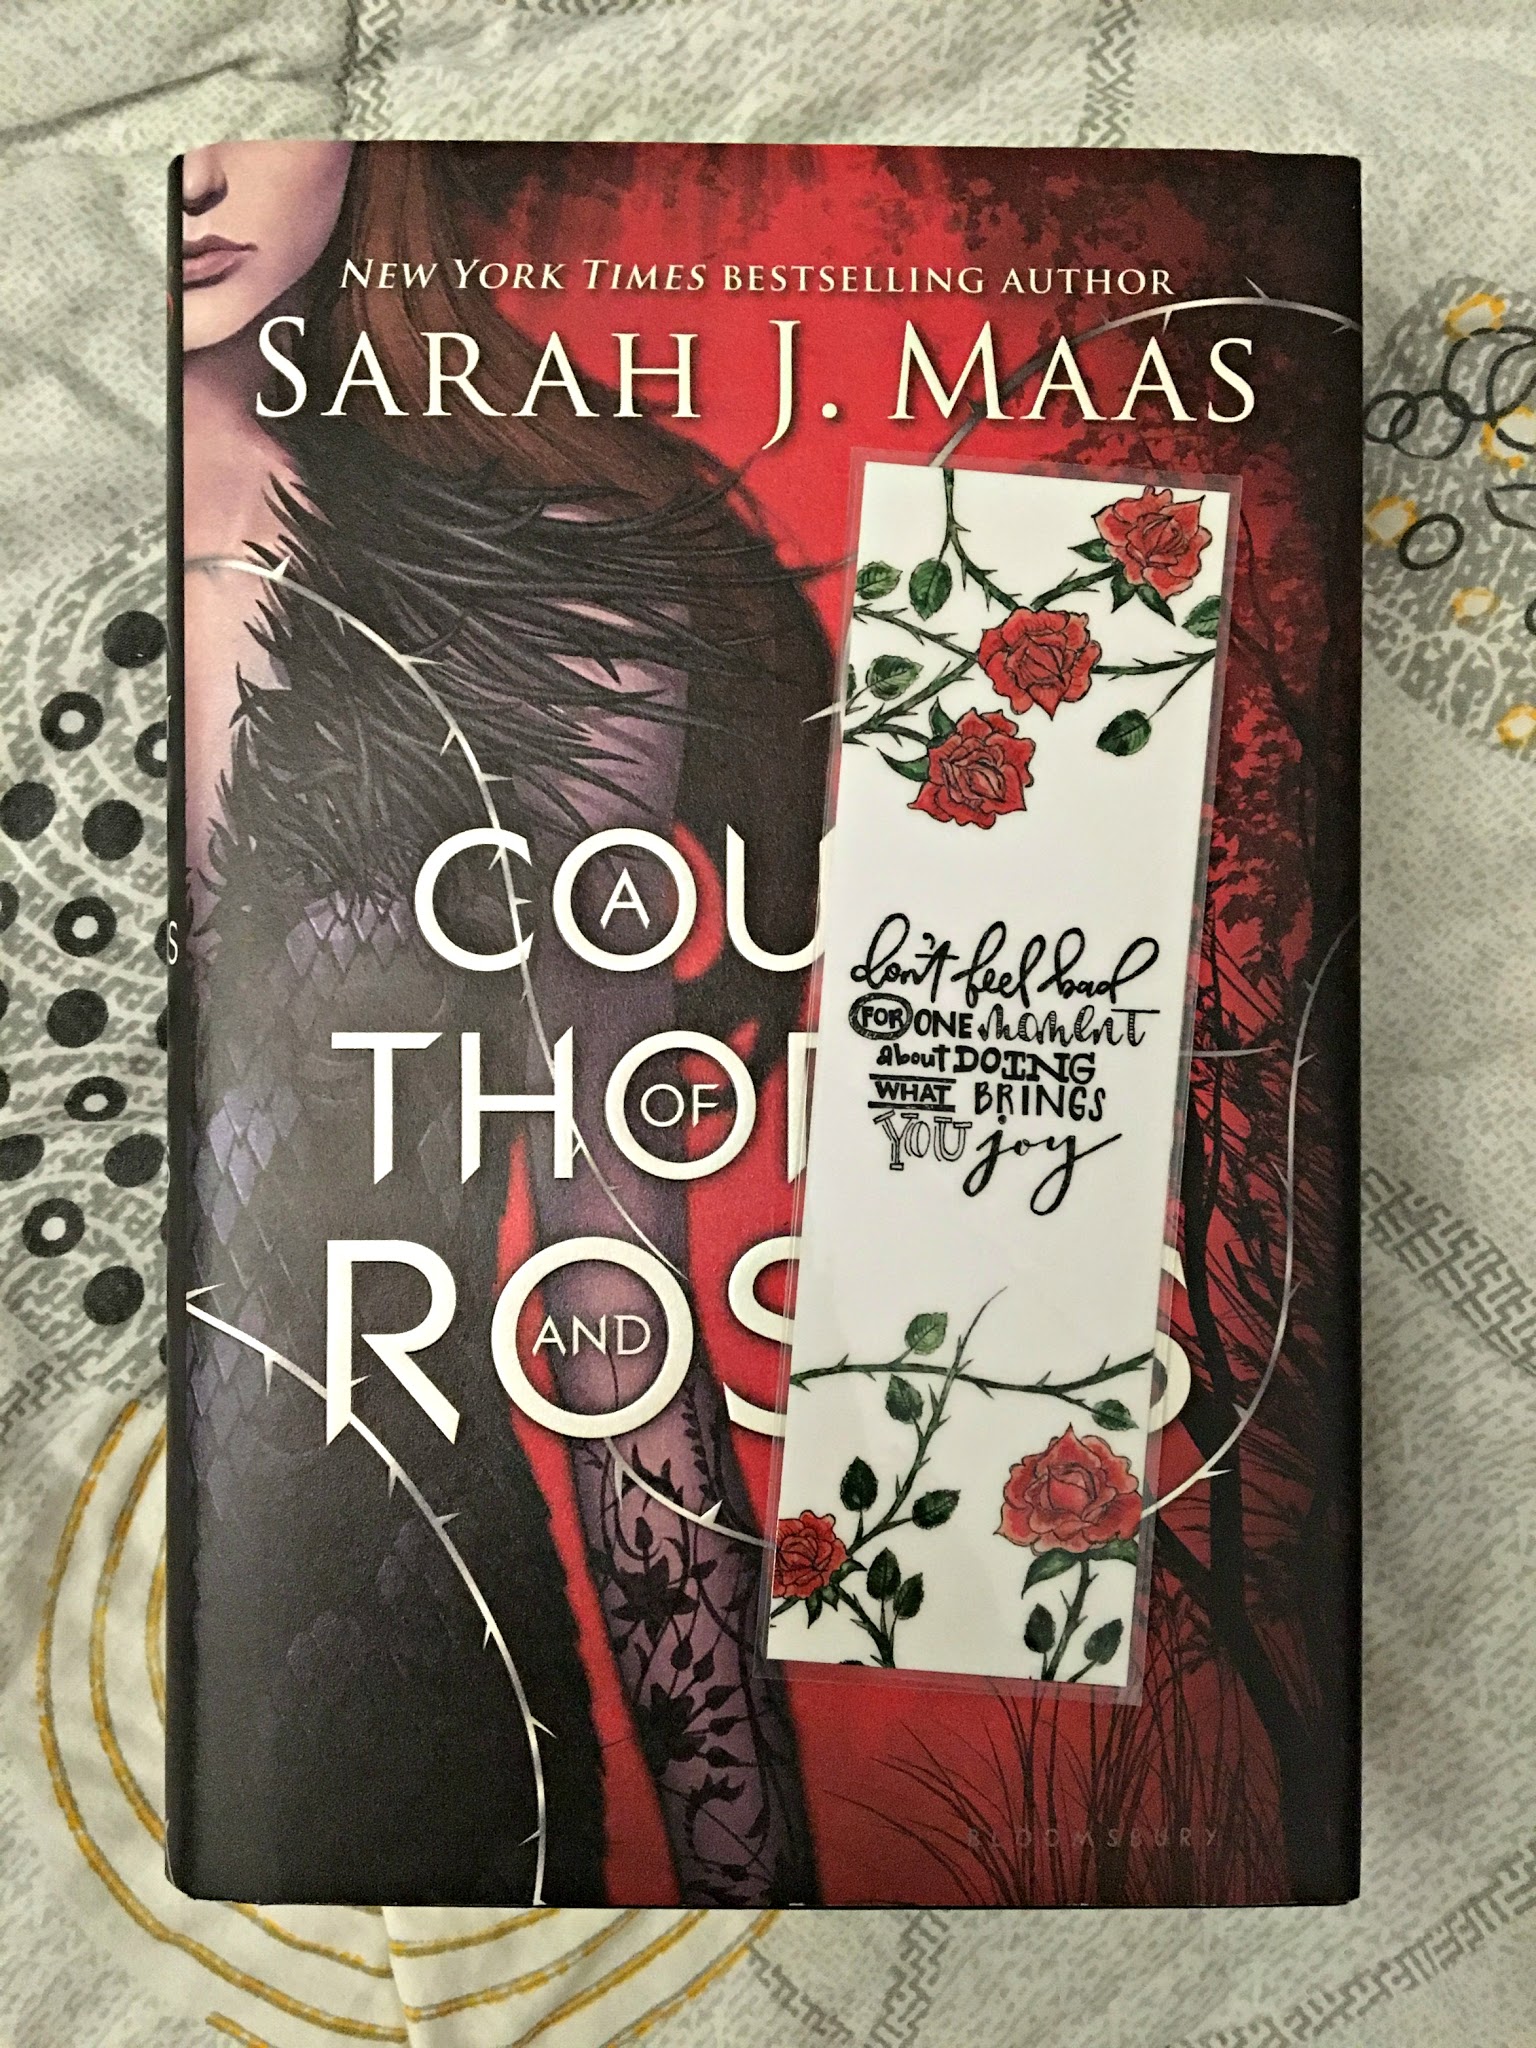 What I Love About A Court of Thorns and Roses